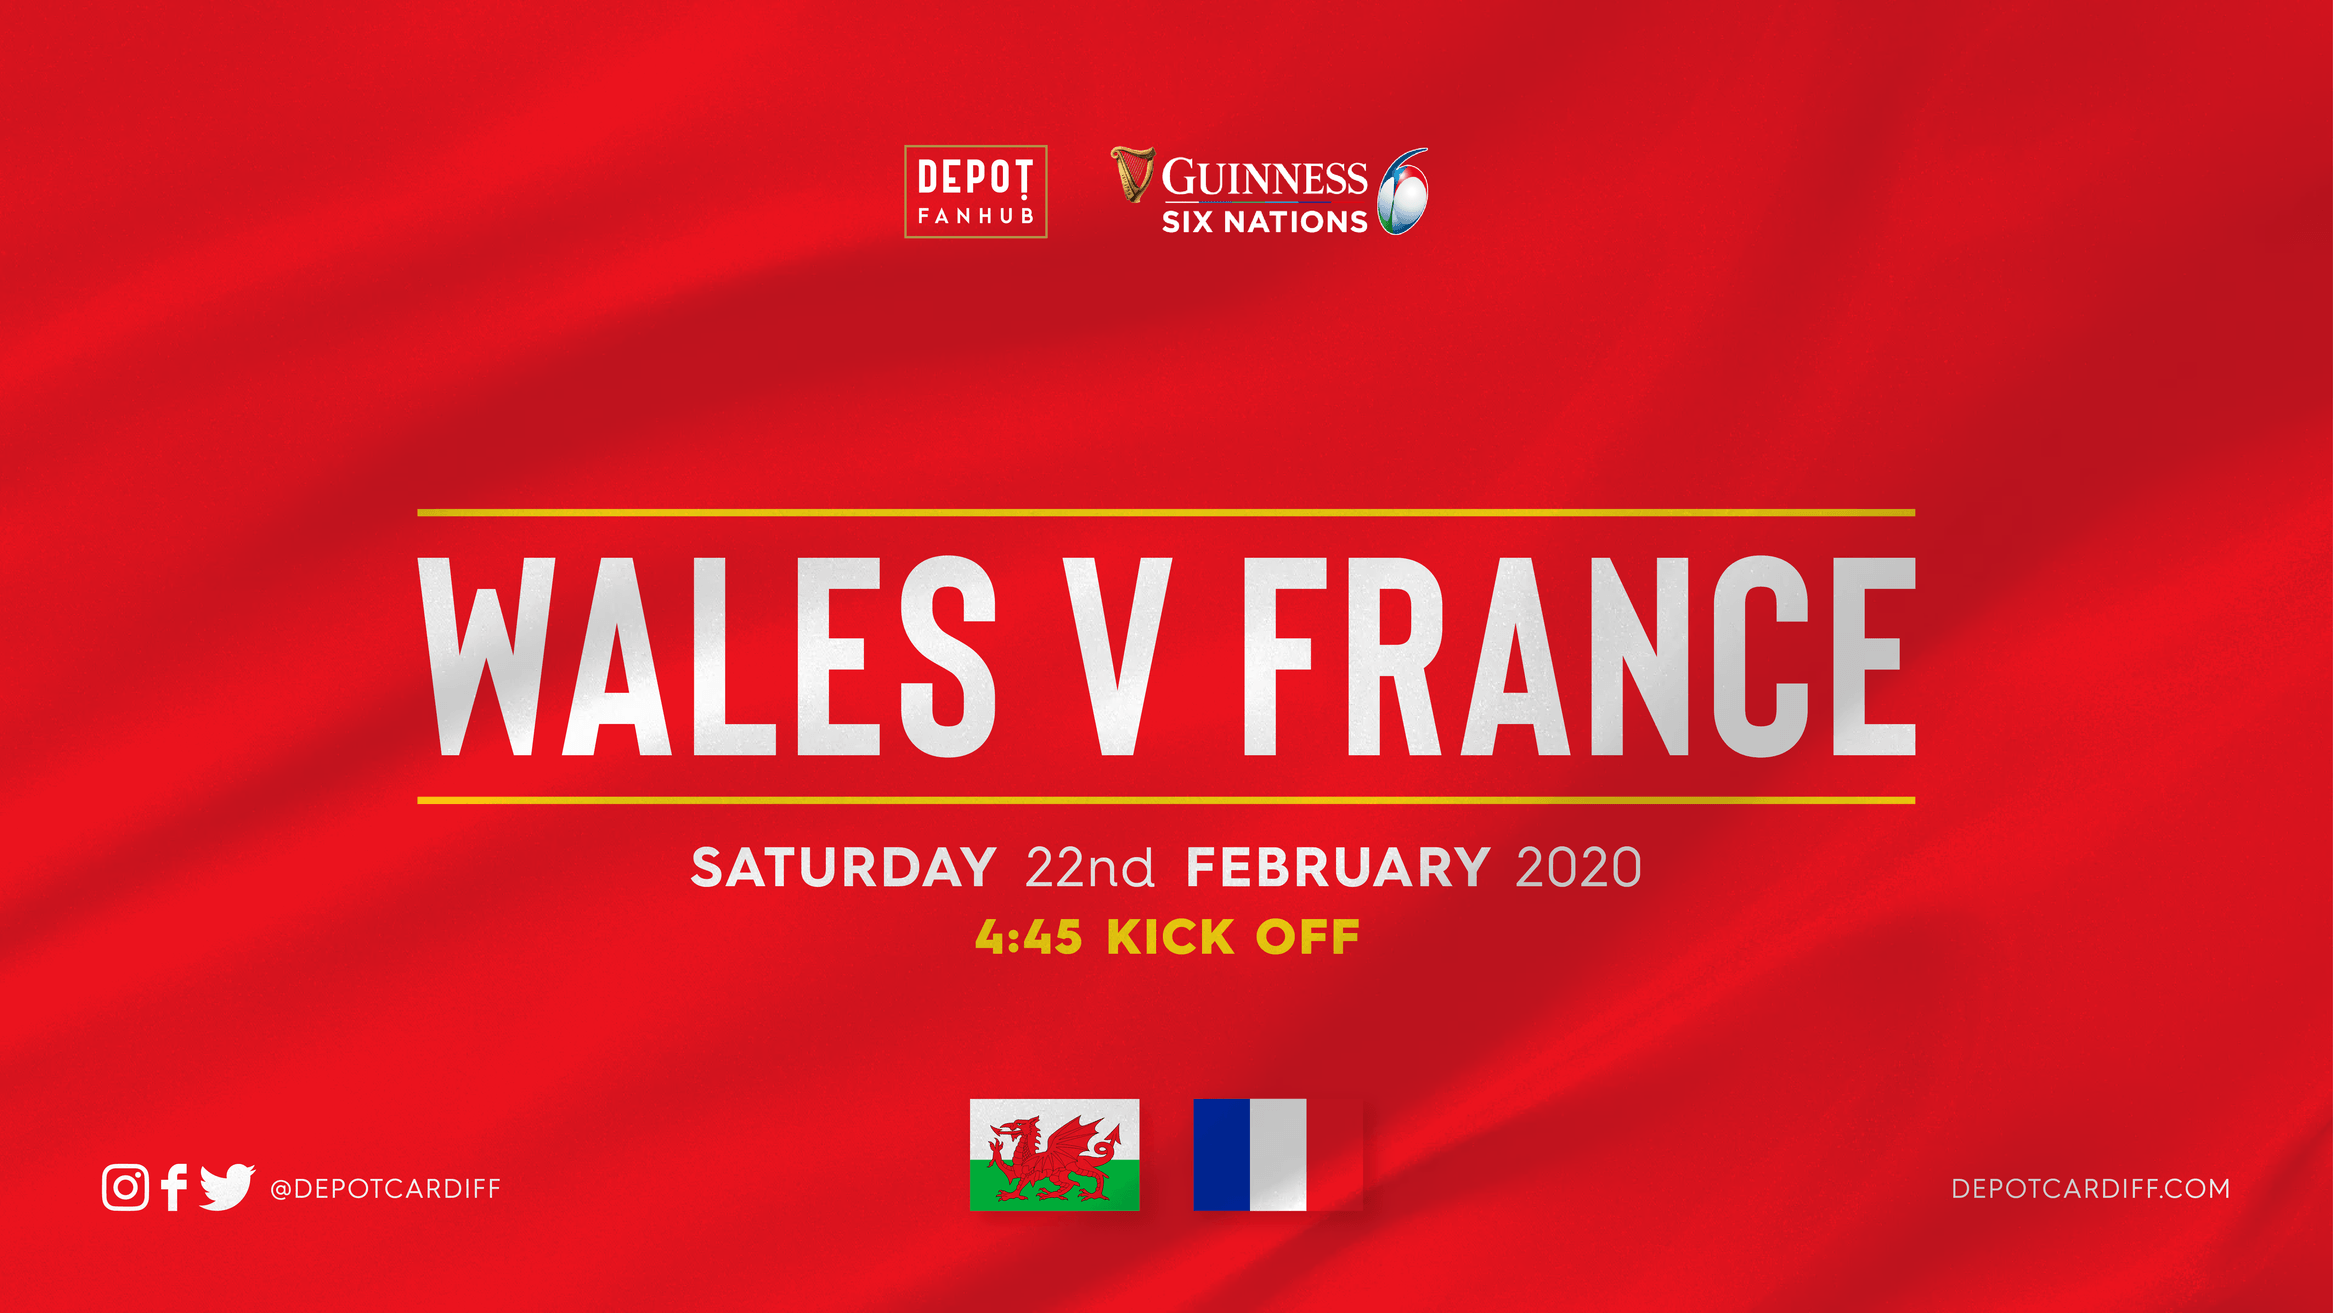 France V Wales at Depot FOR Cardiff